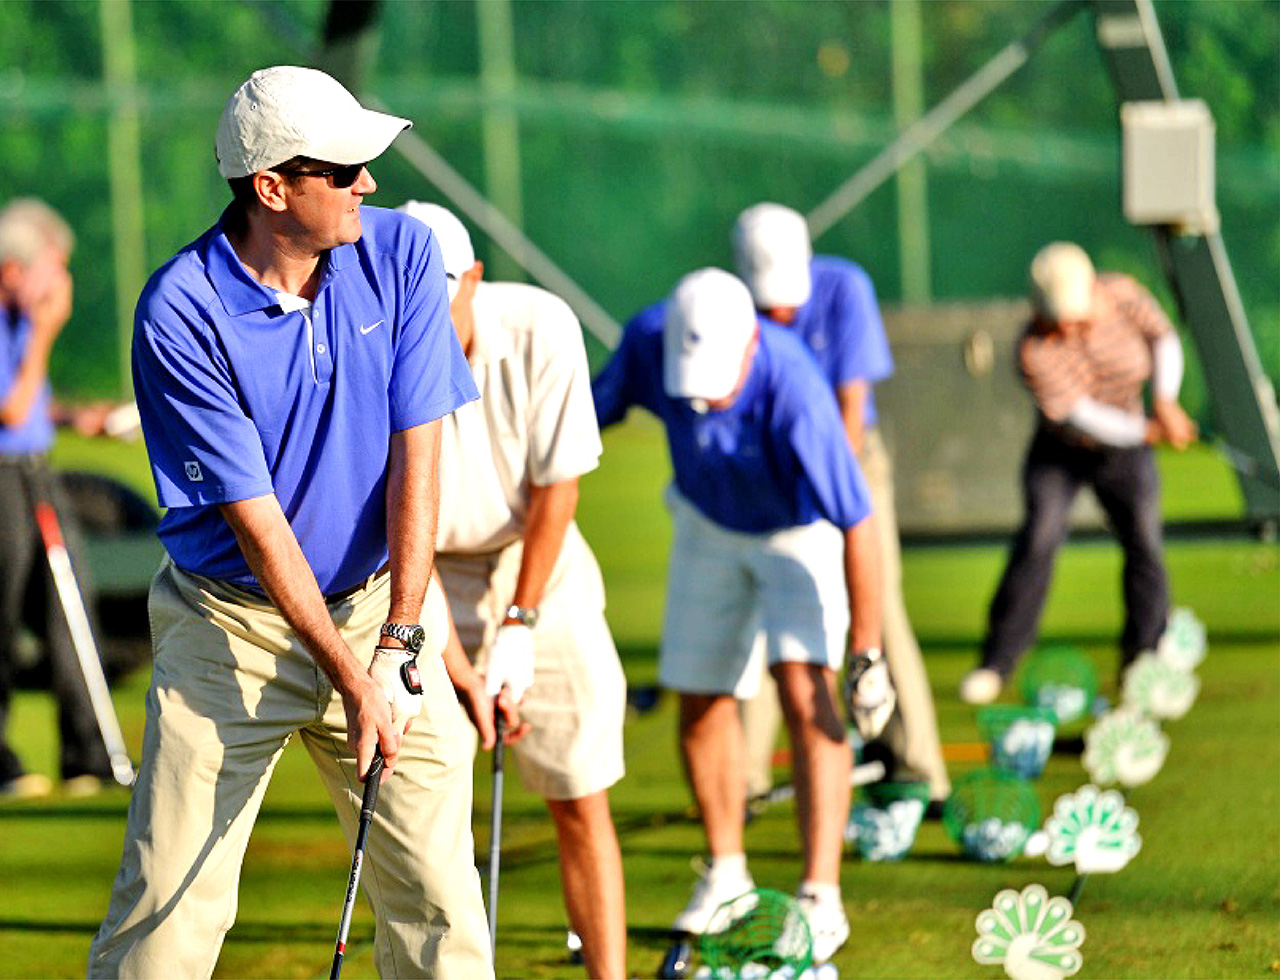 Business associates playing golf during a corporate teambuilding event